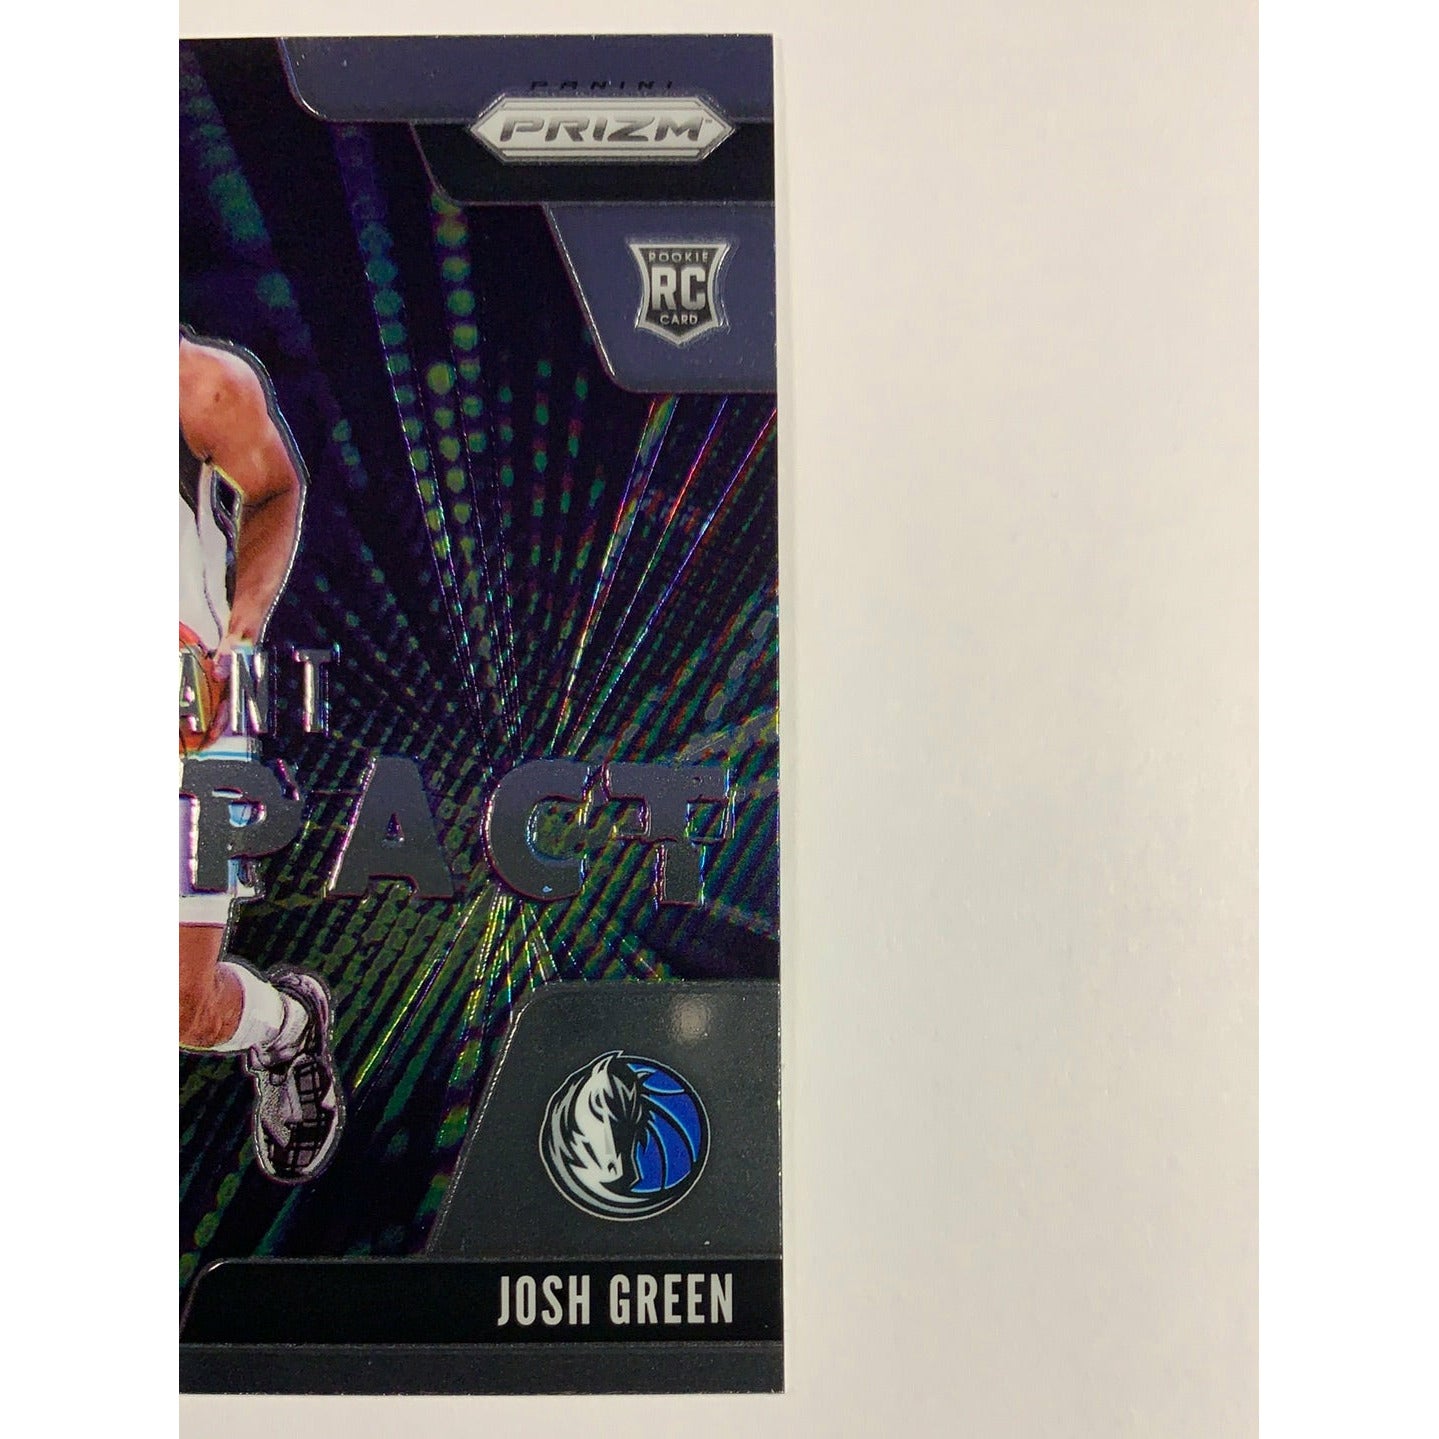  2020-21 Prizm Josh Green Instant Impact RC  Local Legends Cards & Collectibles